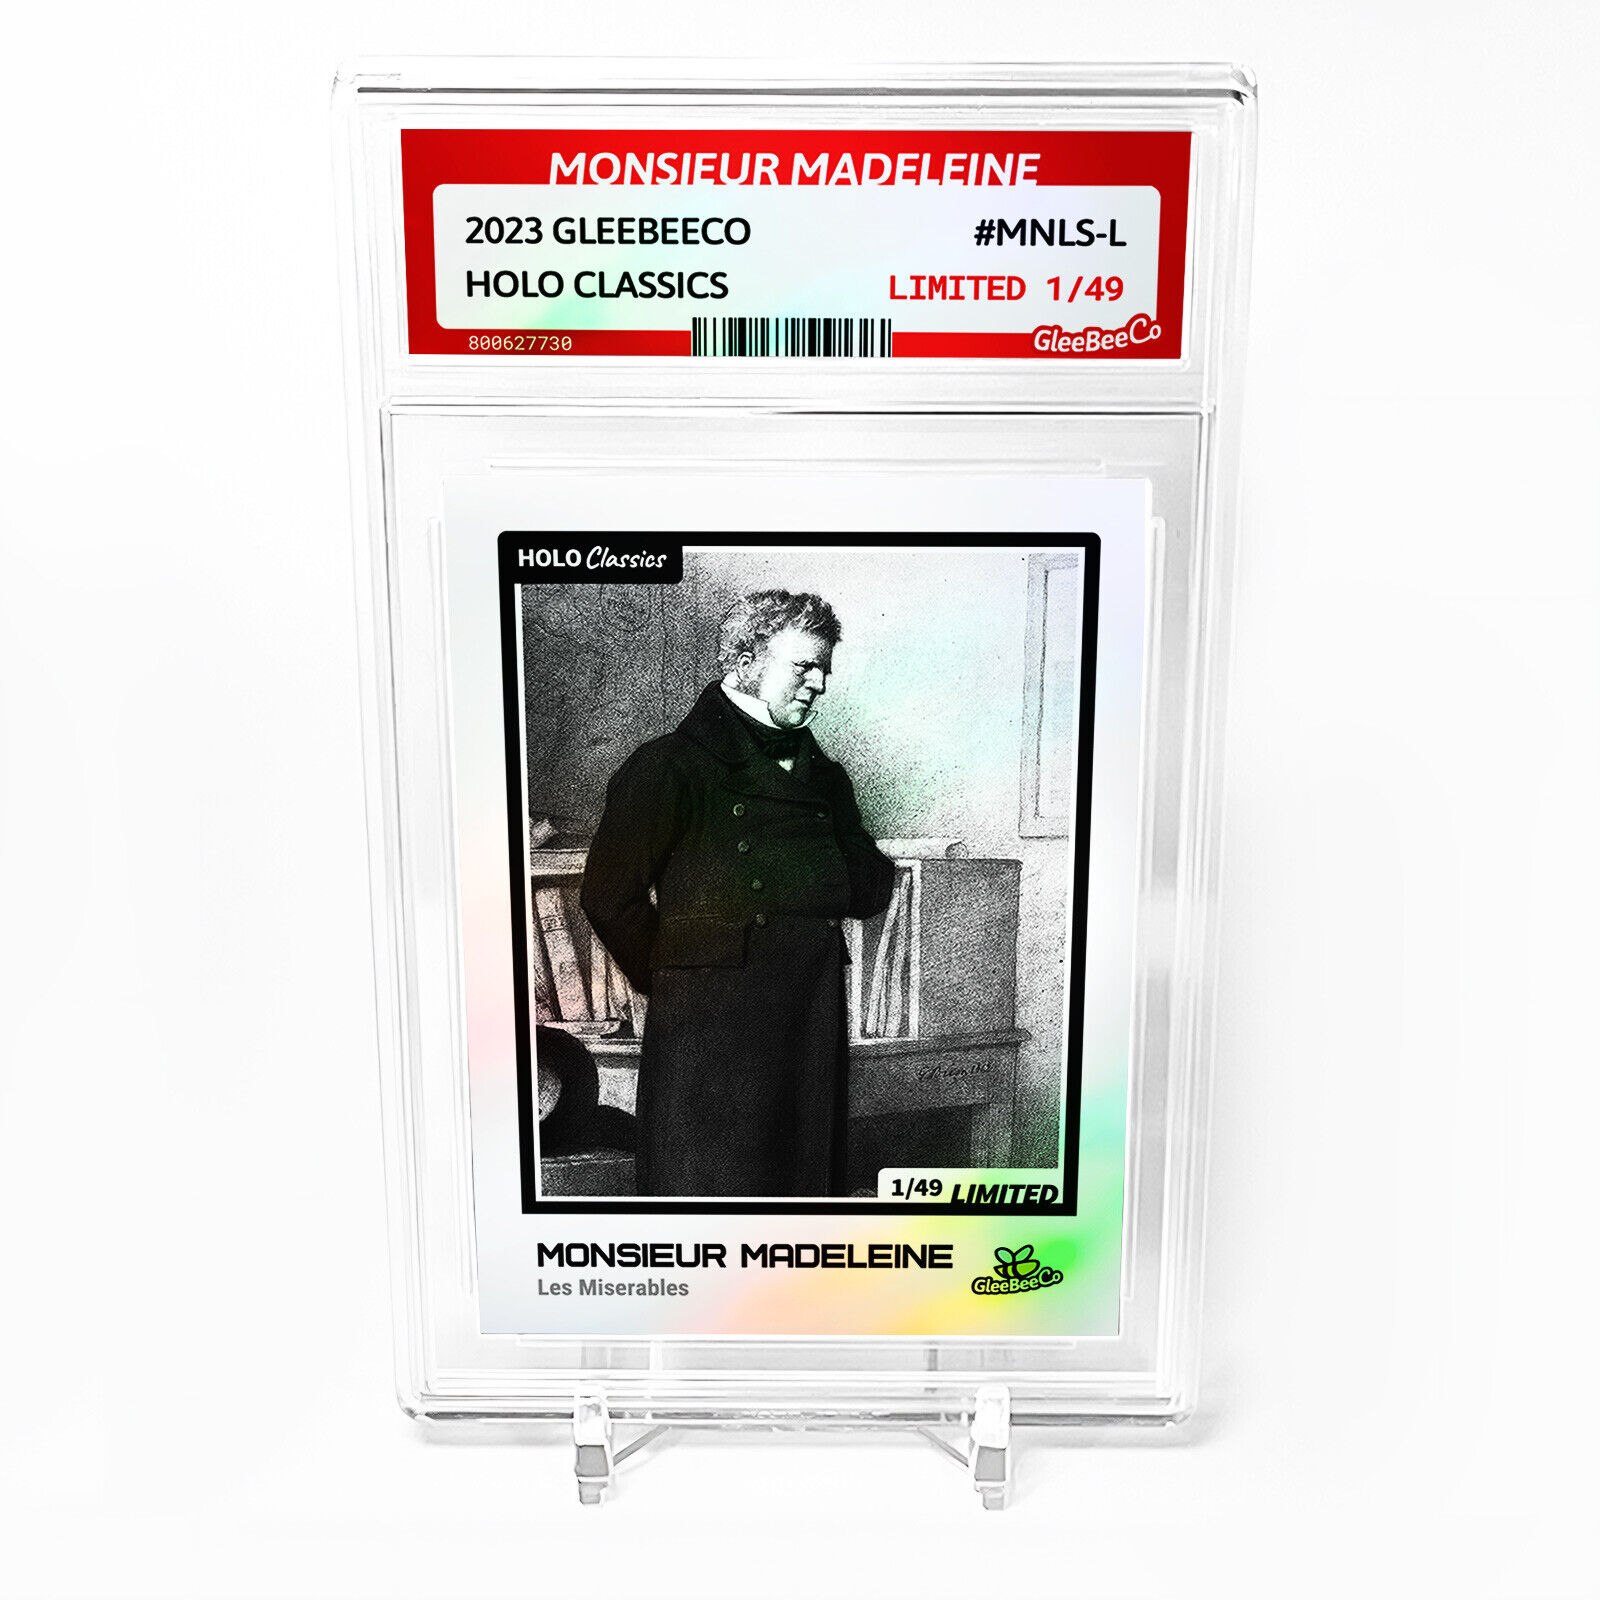 MONSIEUR MADELEINE Les Miserables Card 2023 GleeBeeCo Holographic #MNLS-L /49